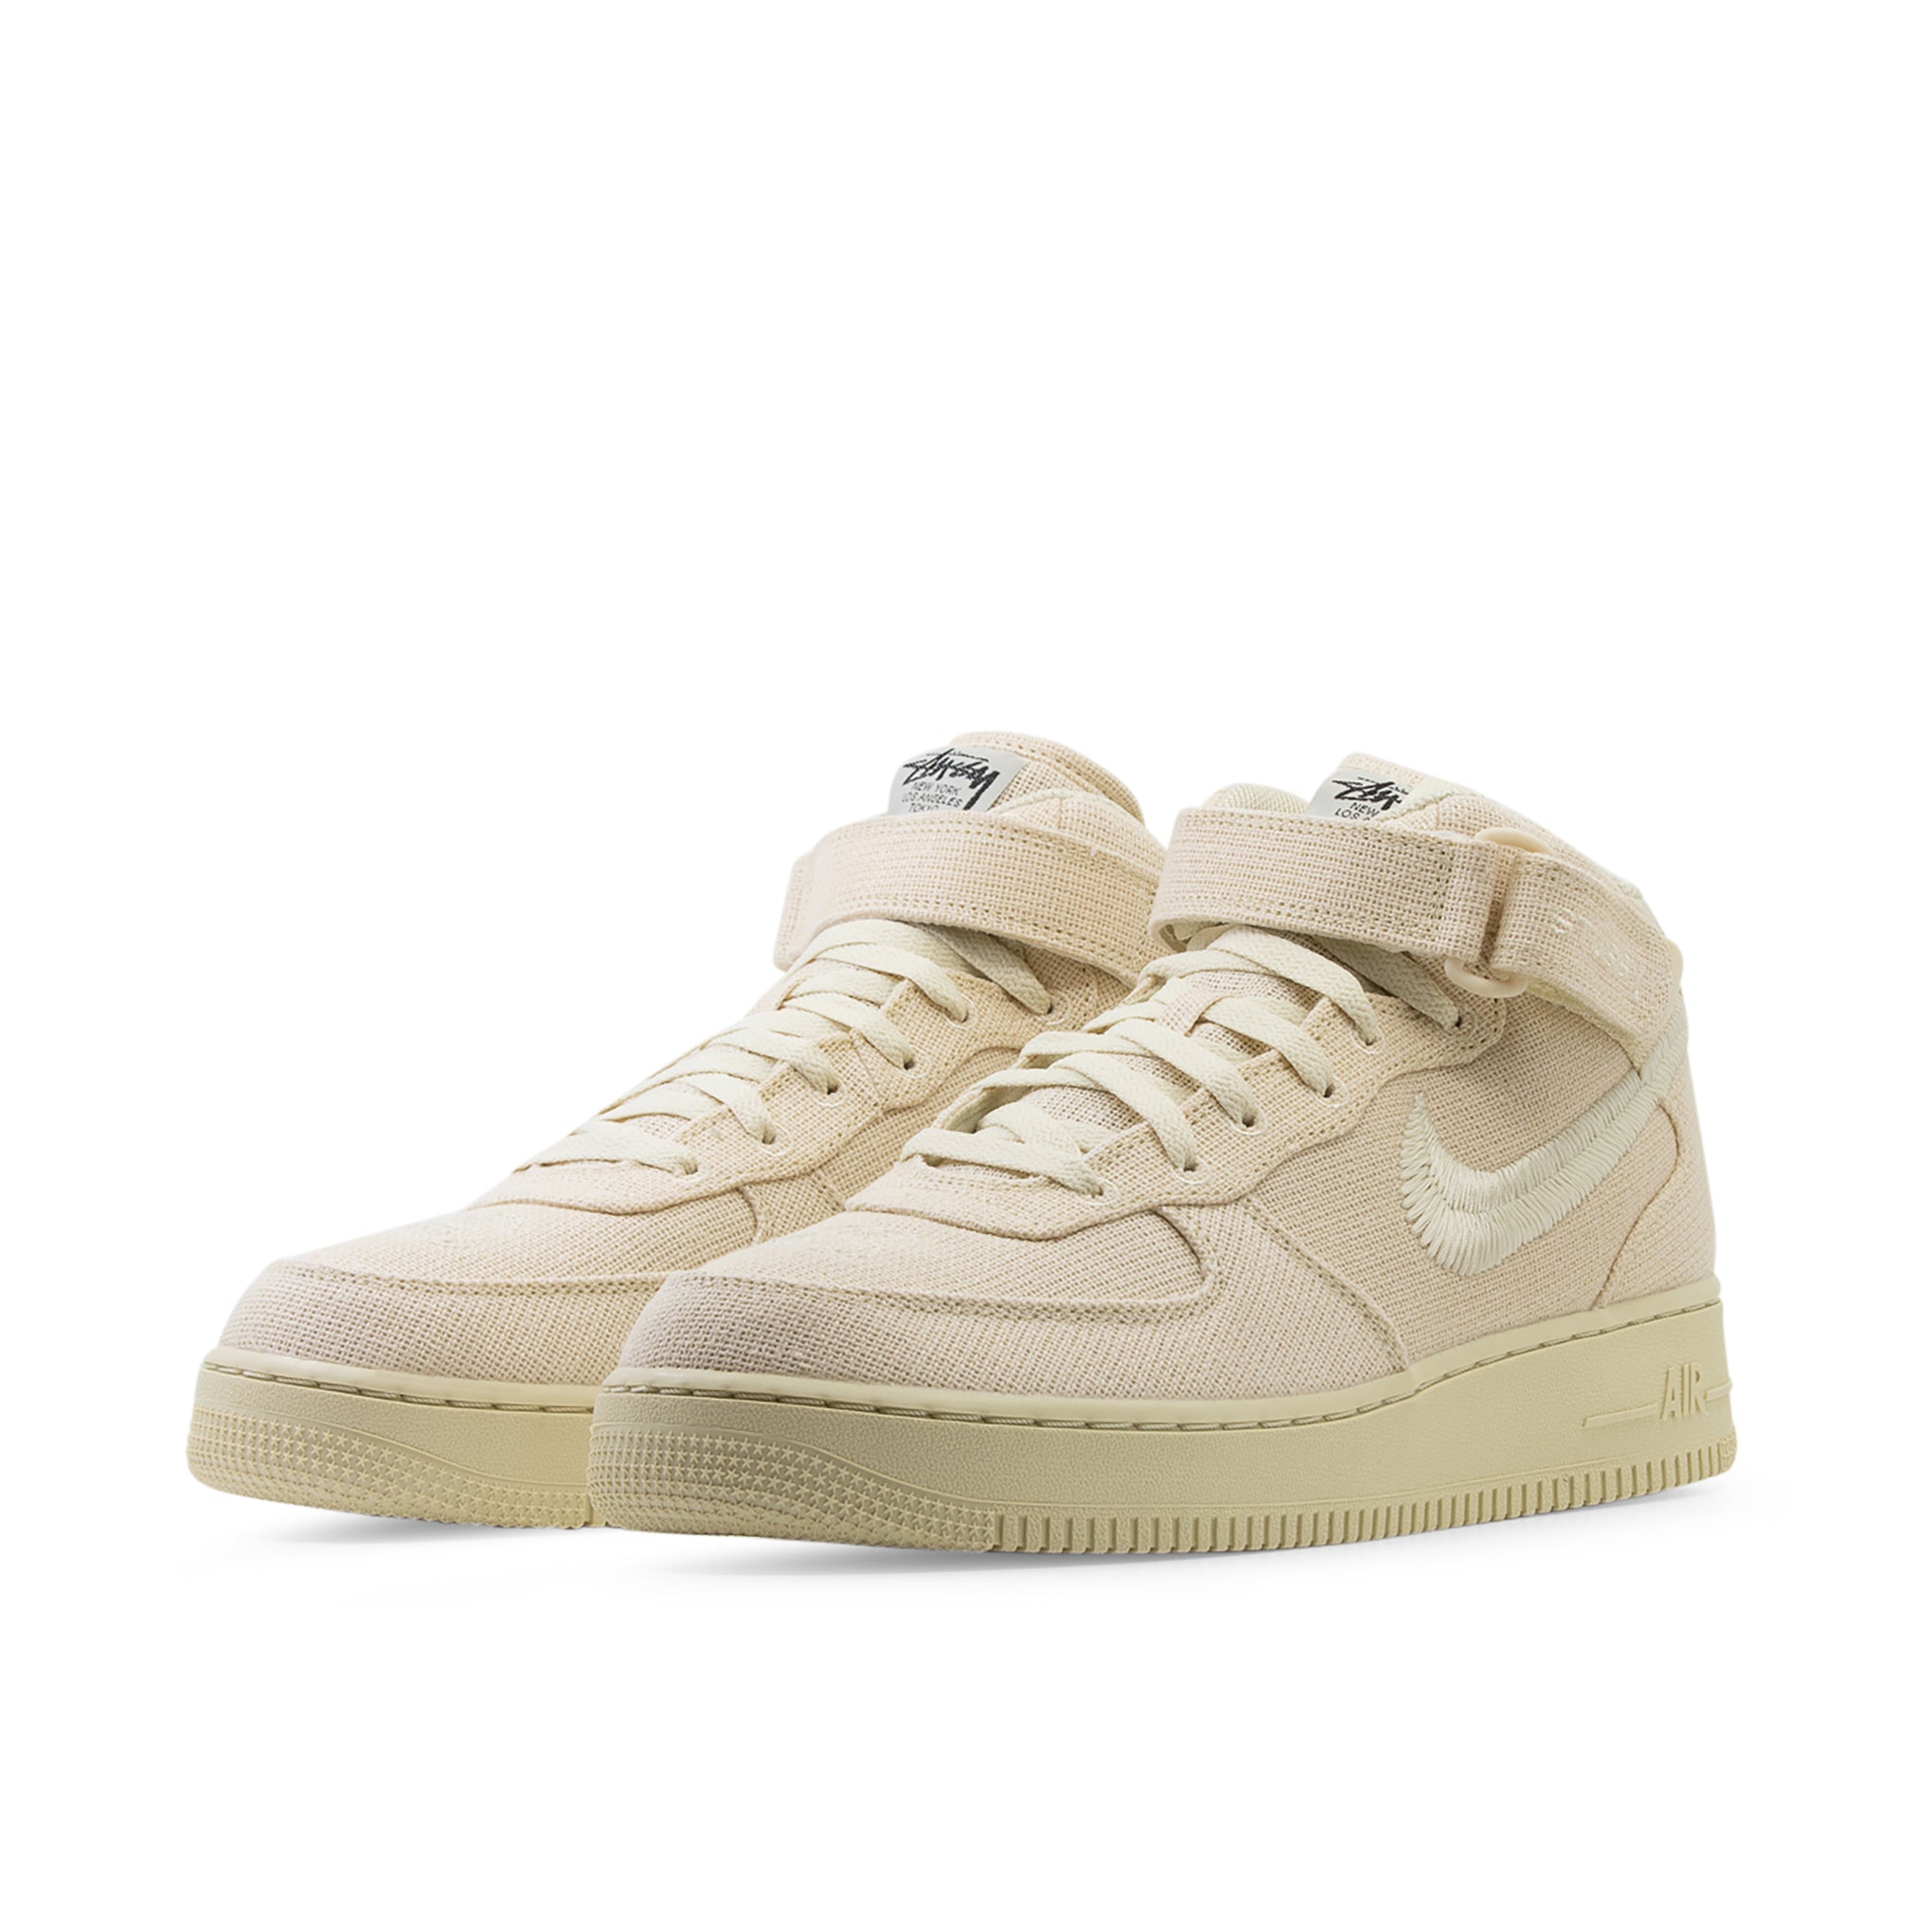 NIKE AIR FORCE 1 MID STUSSY FOSSIL